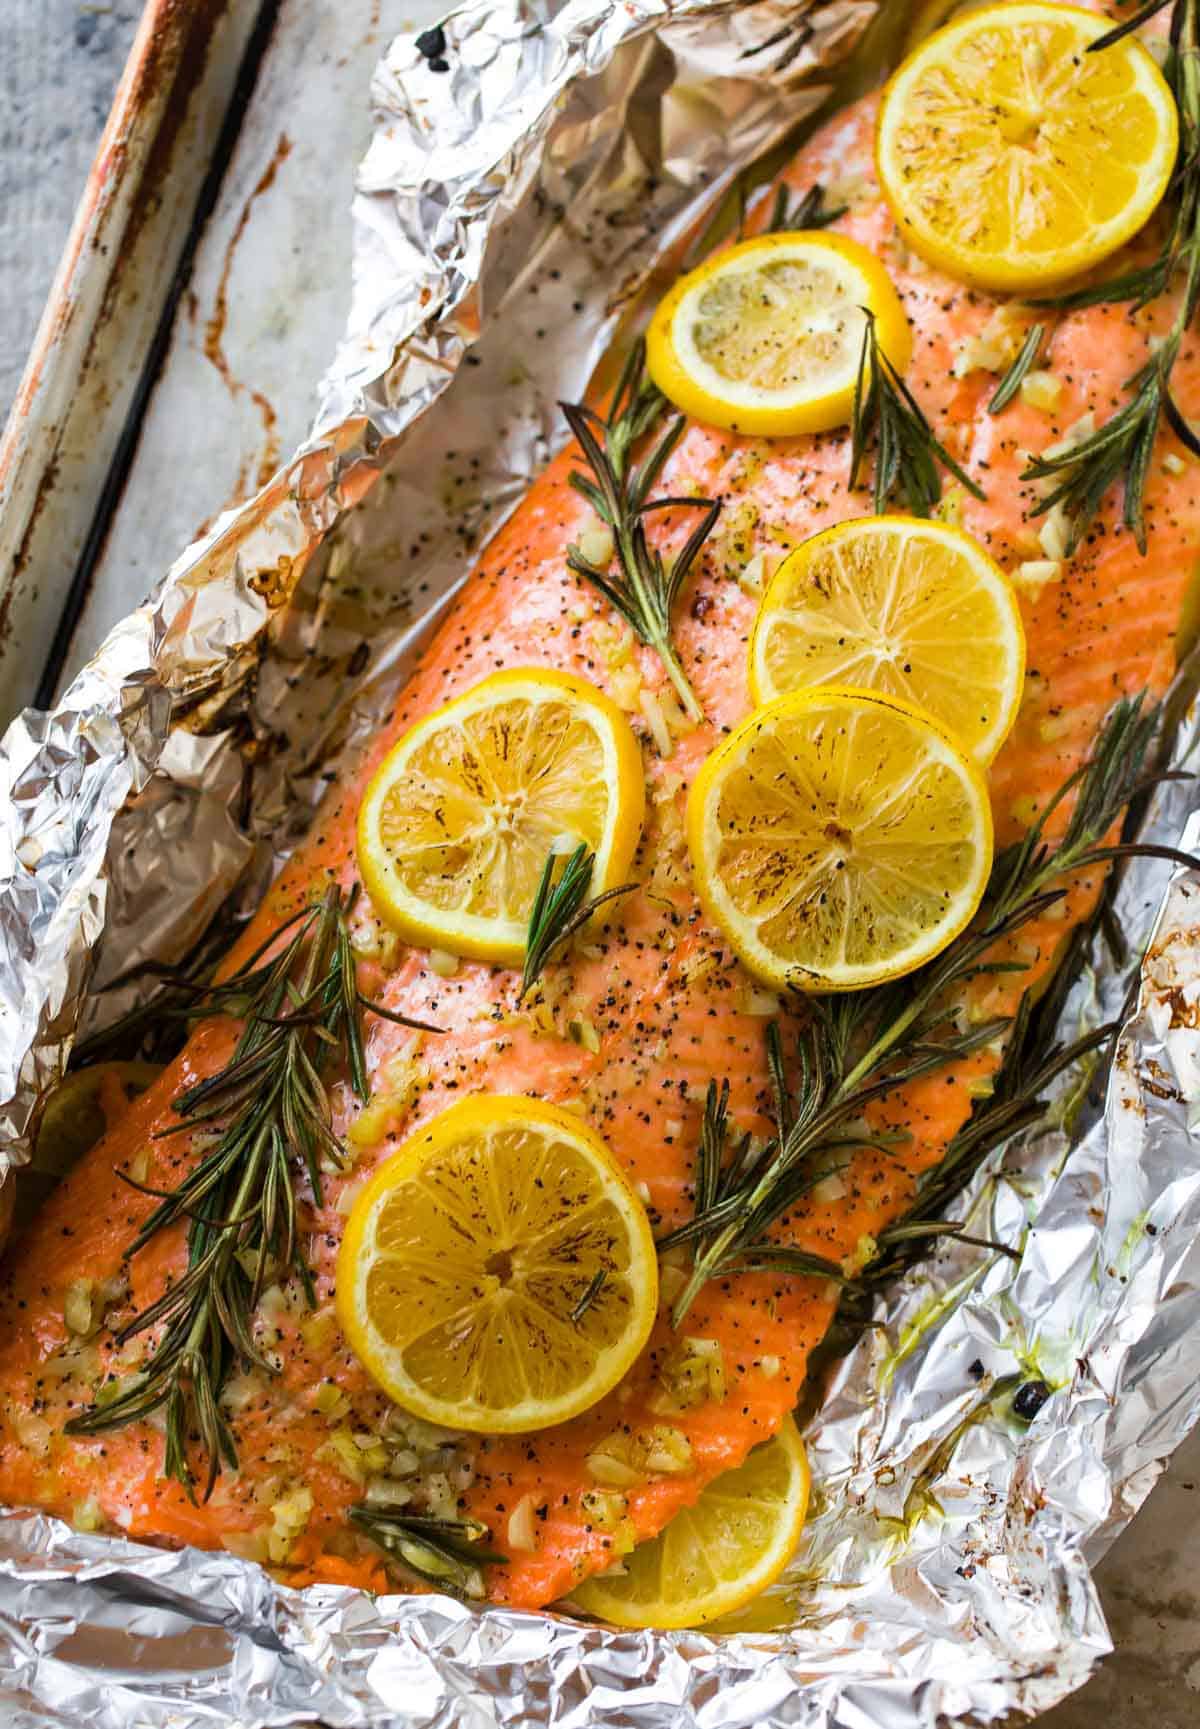 Healthy baked salmon in foil with lemon and herbs